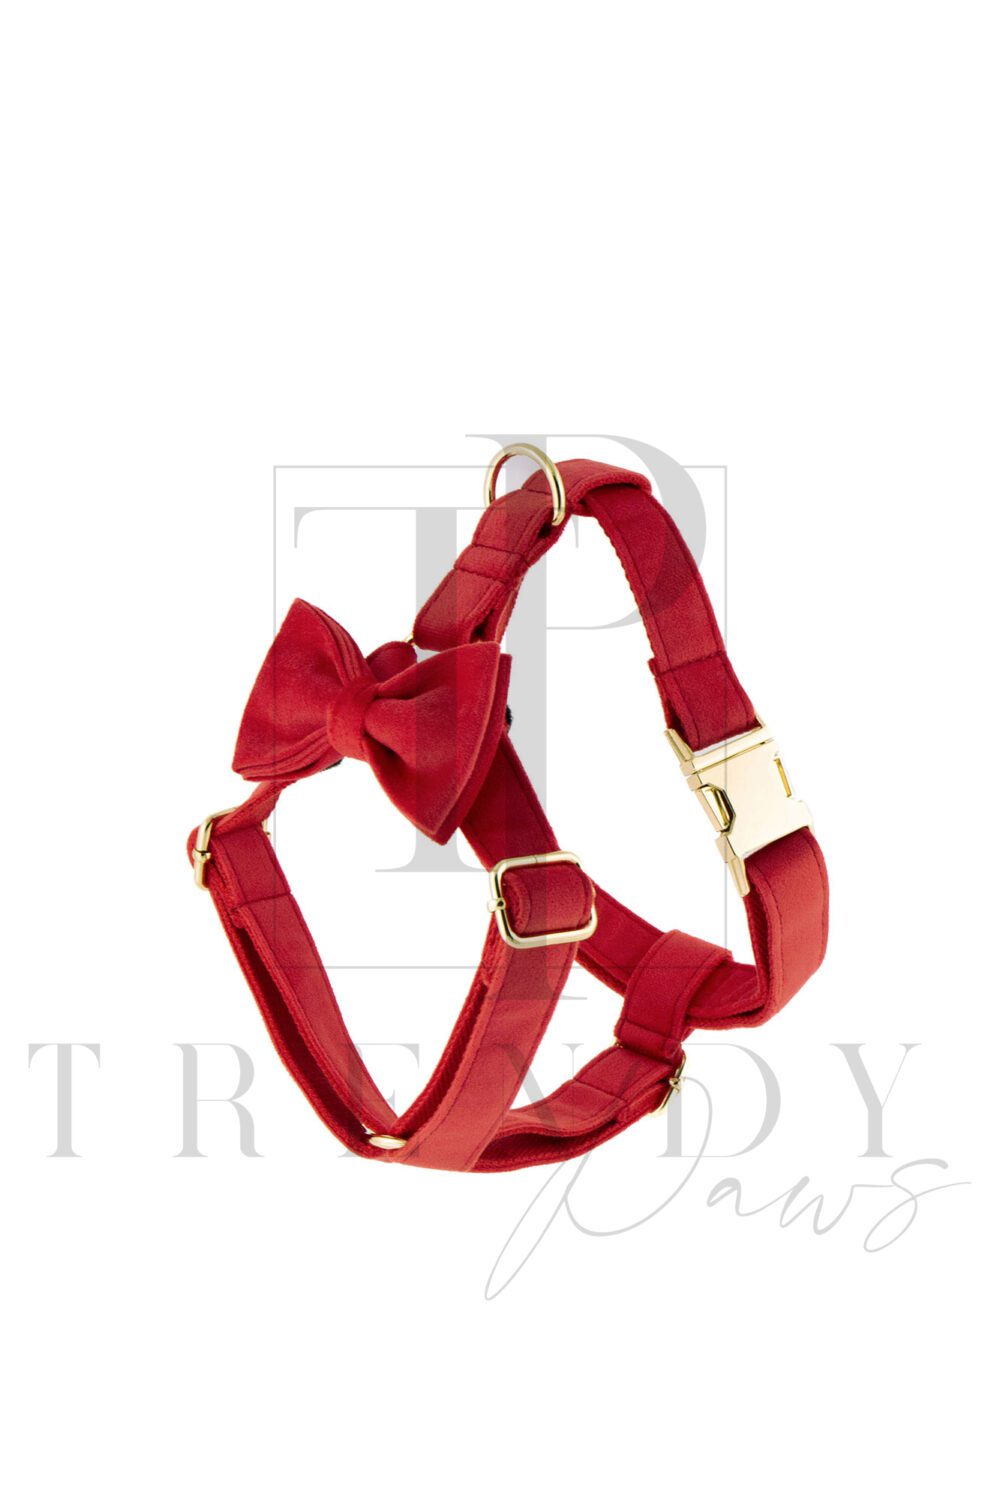 Red velvet soft dog harnesses harness bow ties